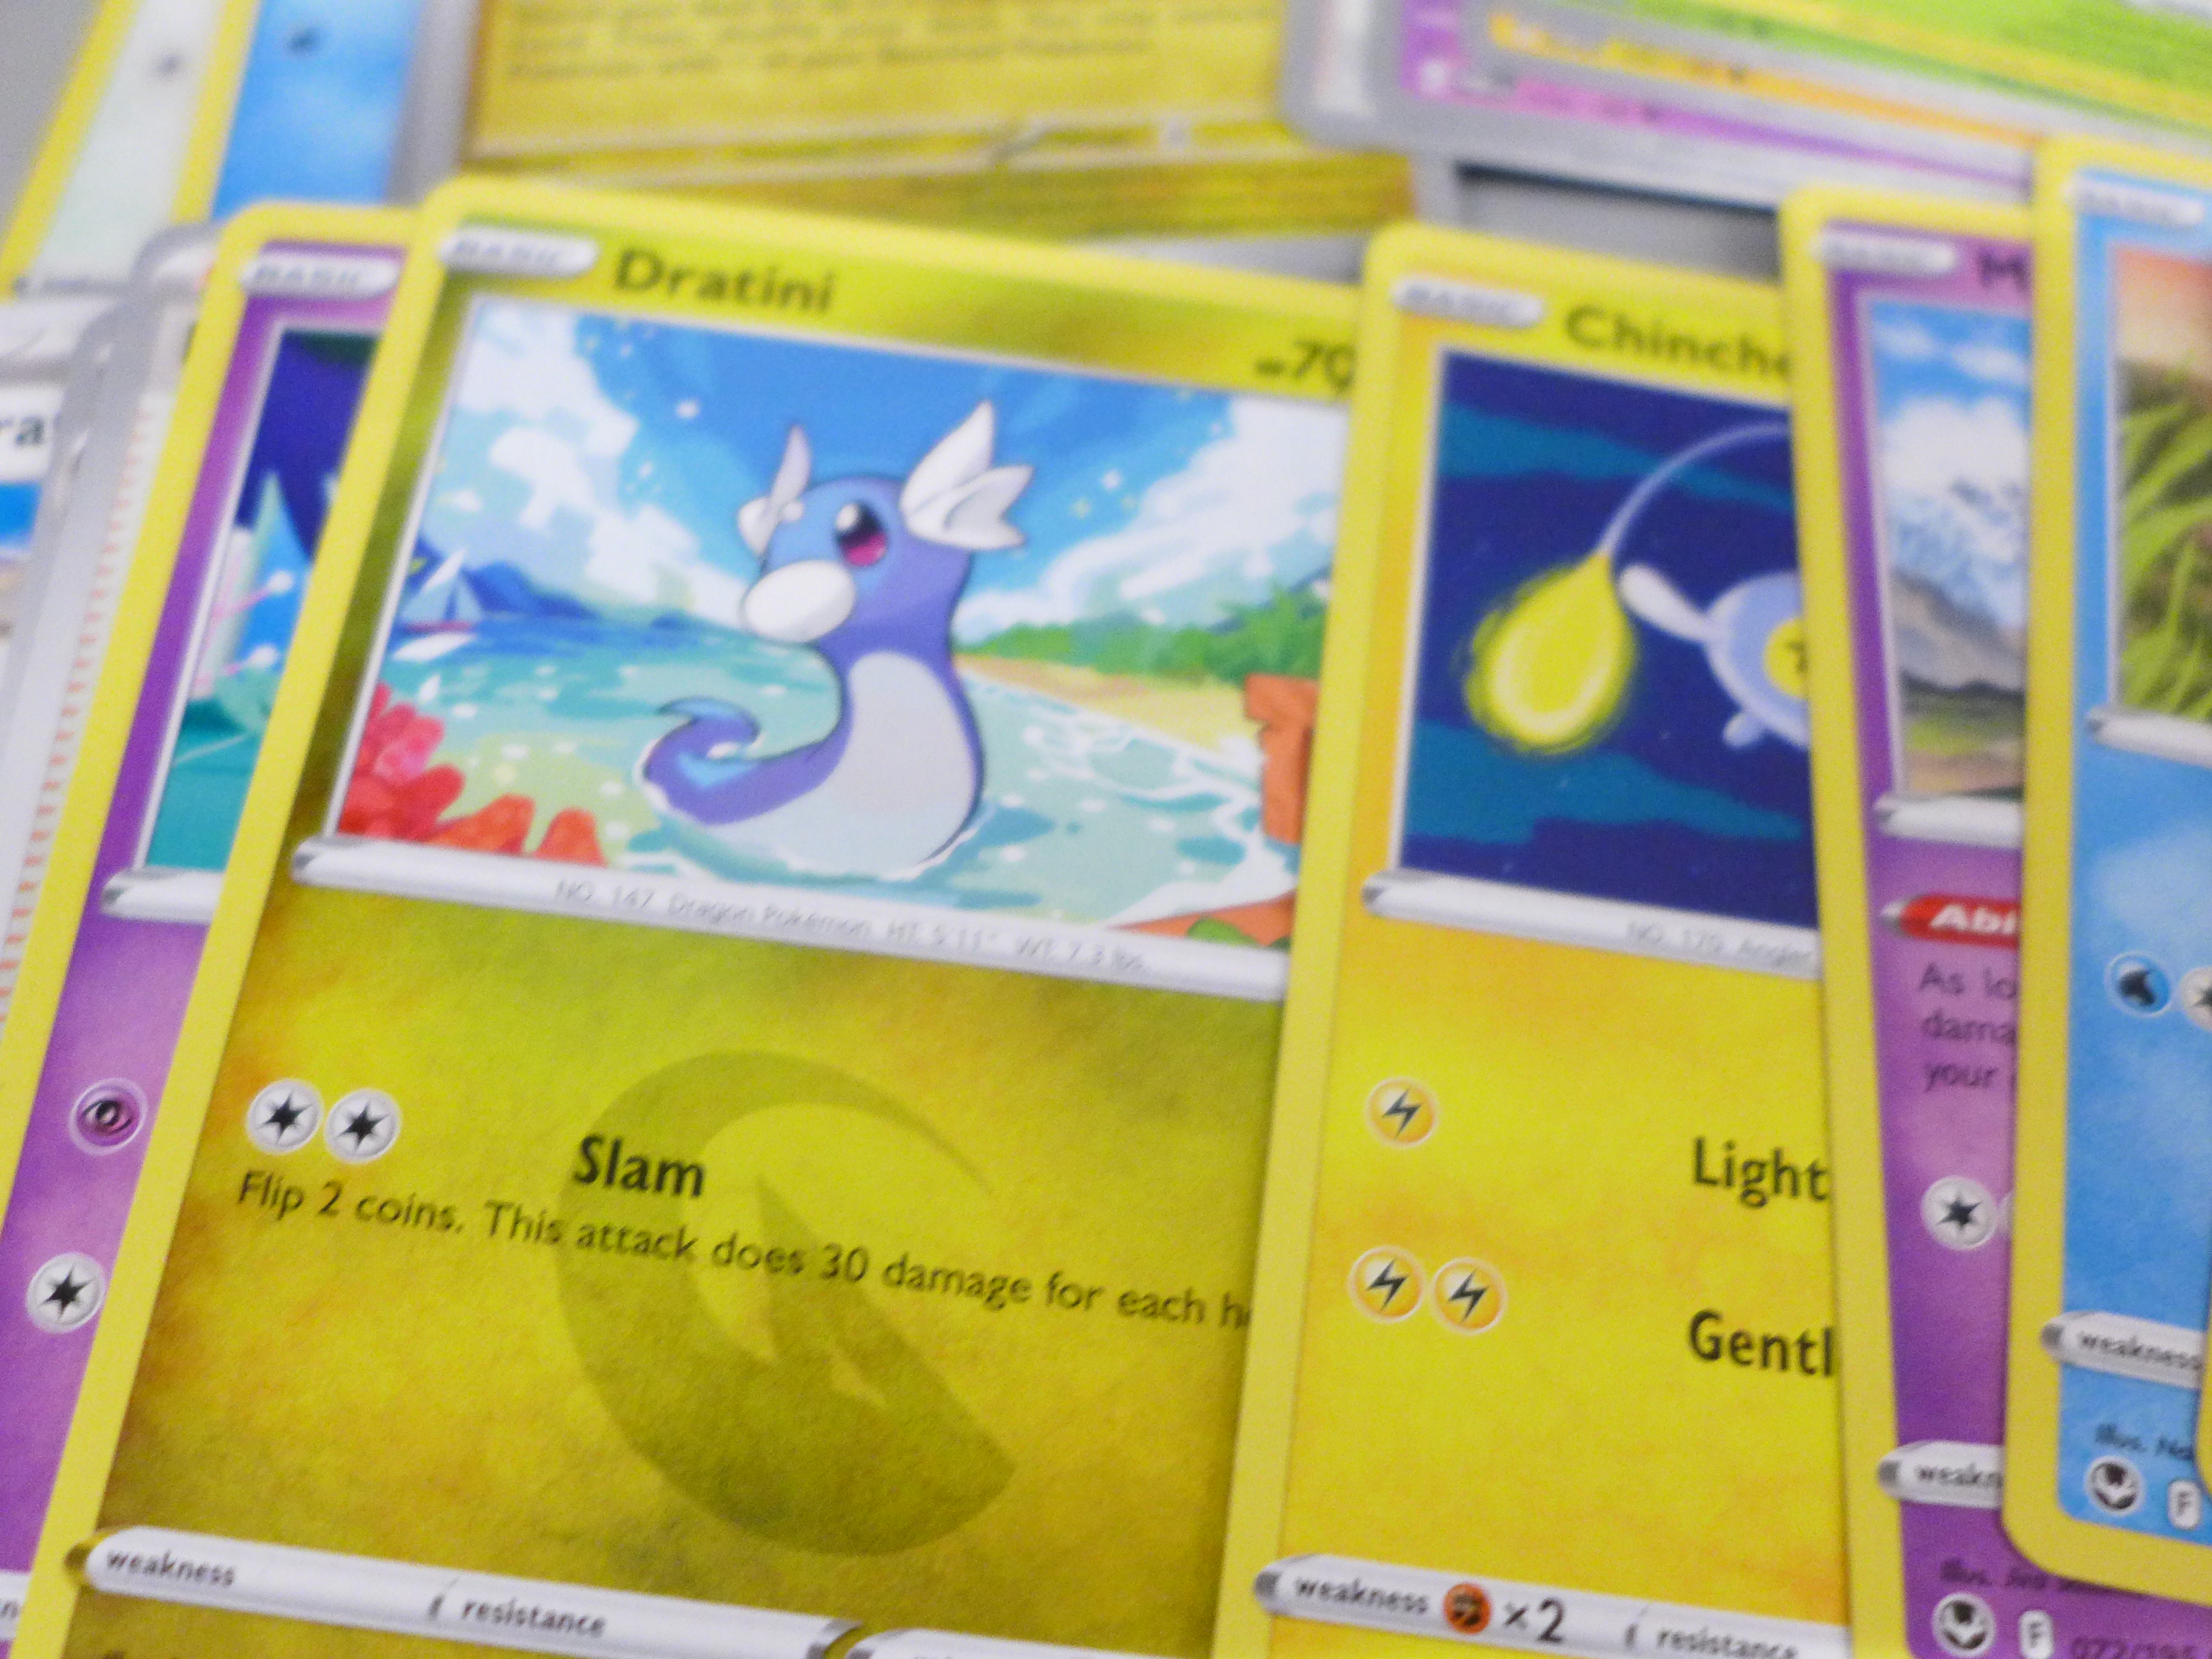 500 x Pokemon cards, including 30 holographic cards, various sets in collectors boxes - Image 4 of 4